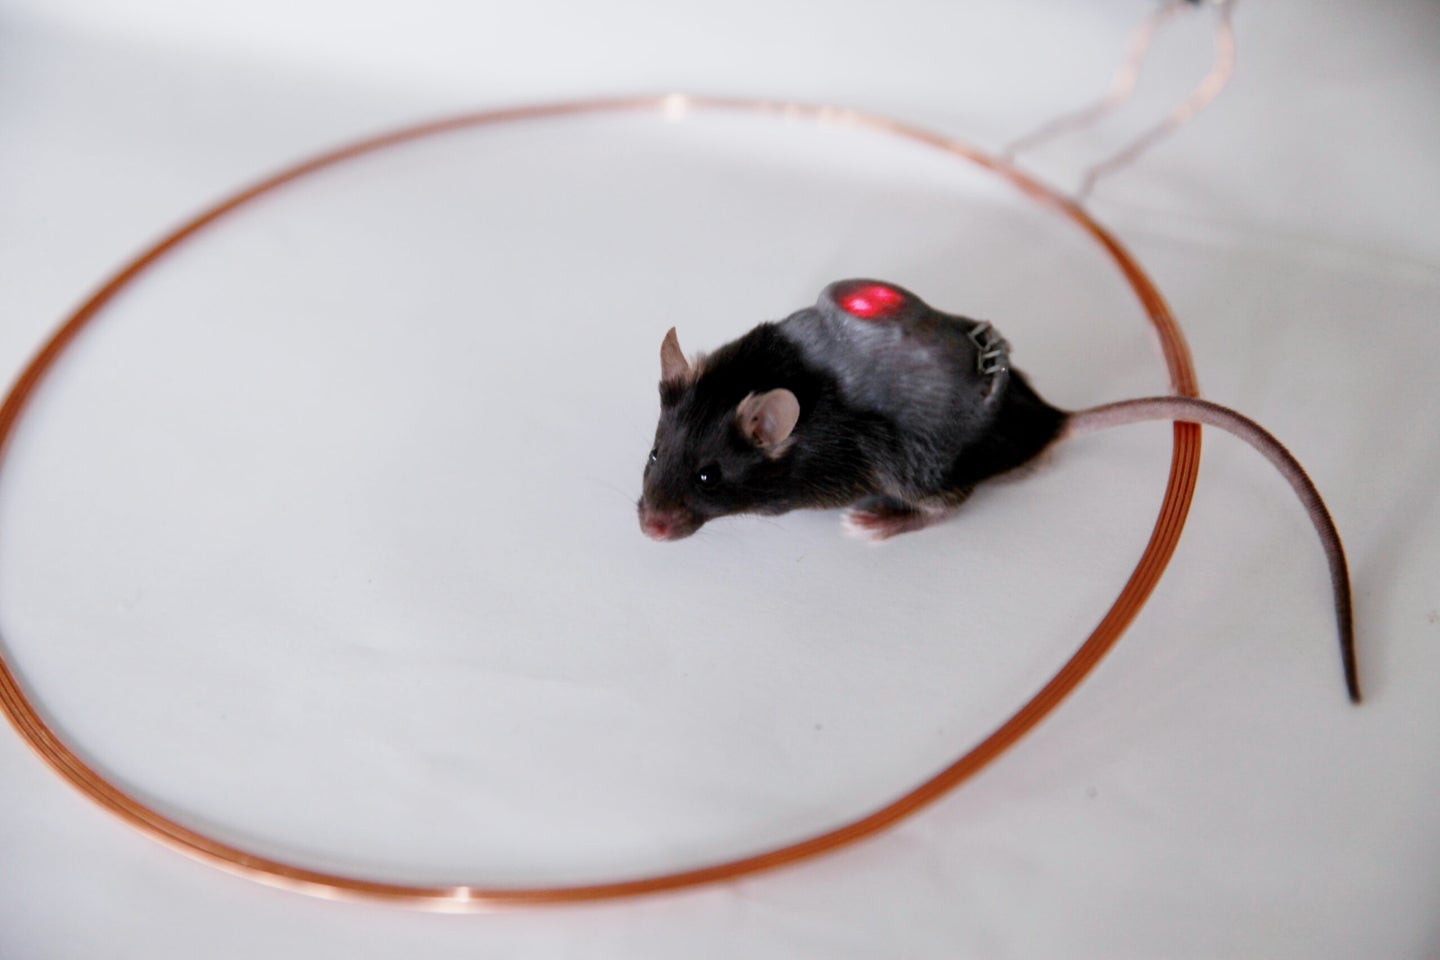 A push of a button causes the cells implanted in this mouse's back to start making insulin. Here, the mouse is standing inside a coil that powers the implant. Future versions would need to be battery operated in order to work in humans.